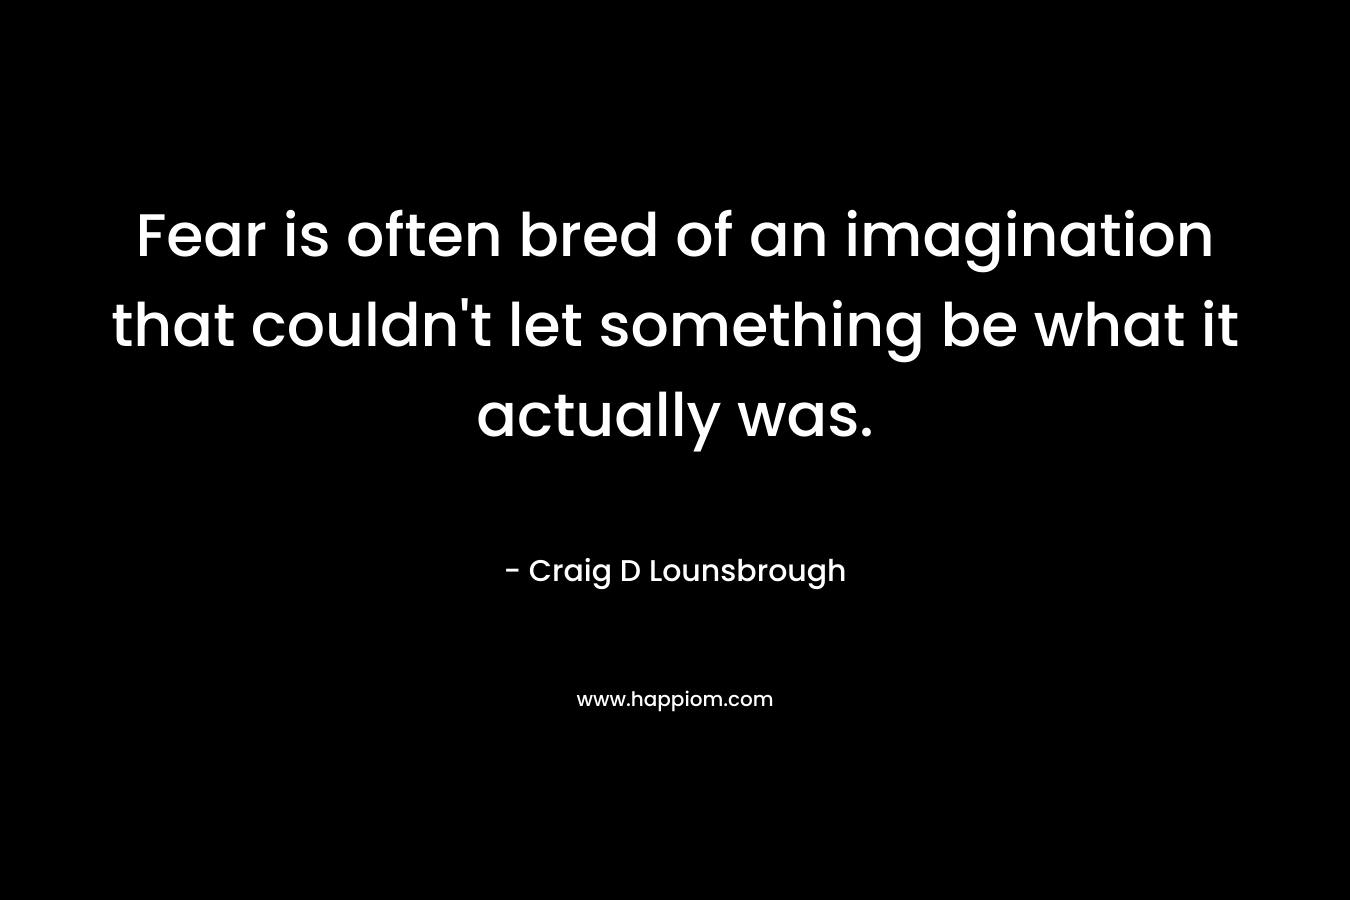 Fear is often bred of an imagination that couldn't let something be what it actually was.